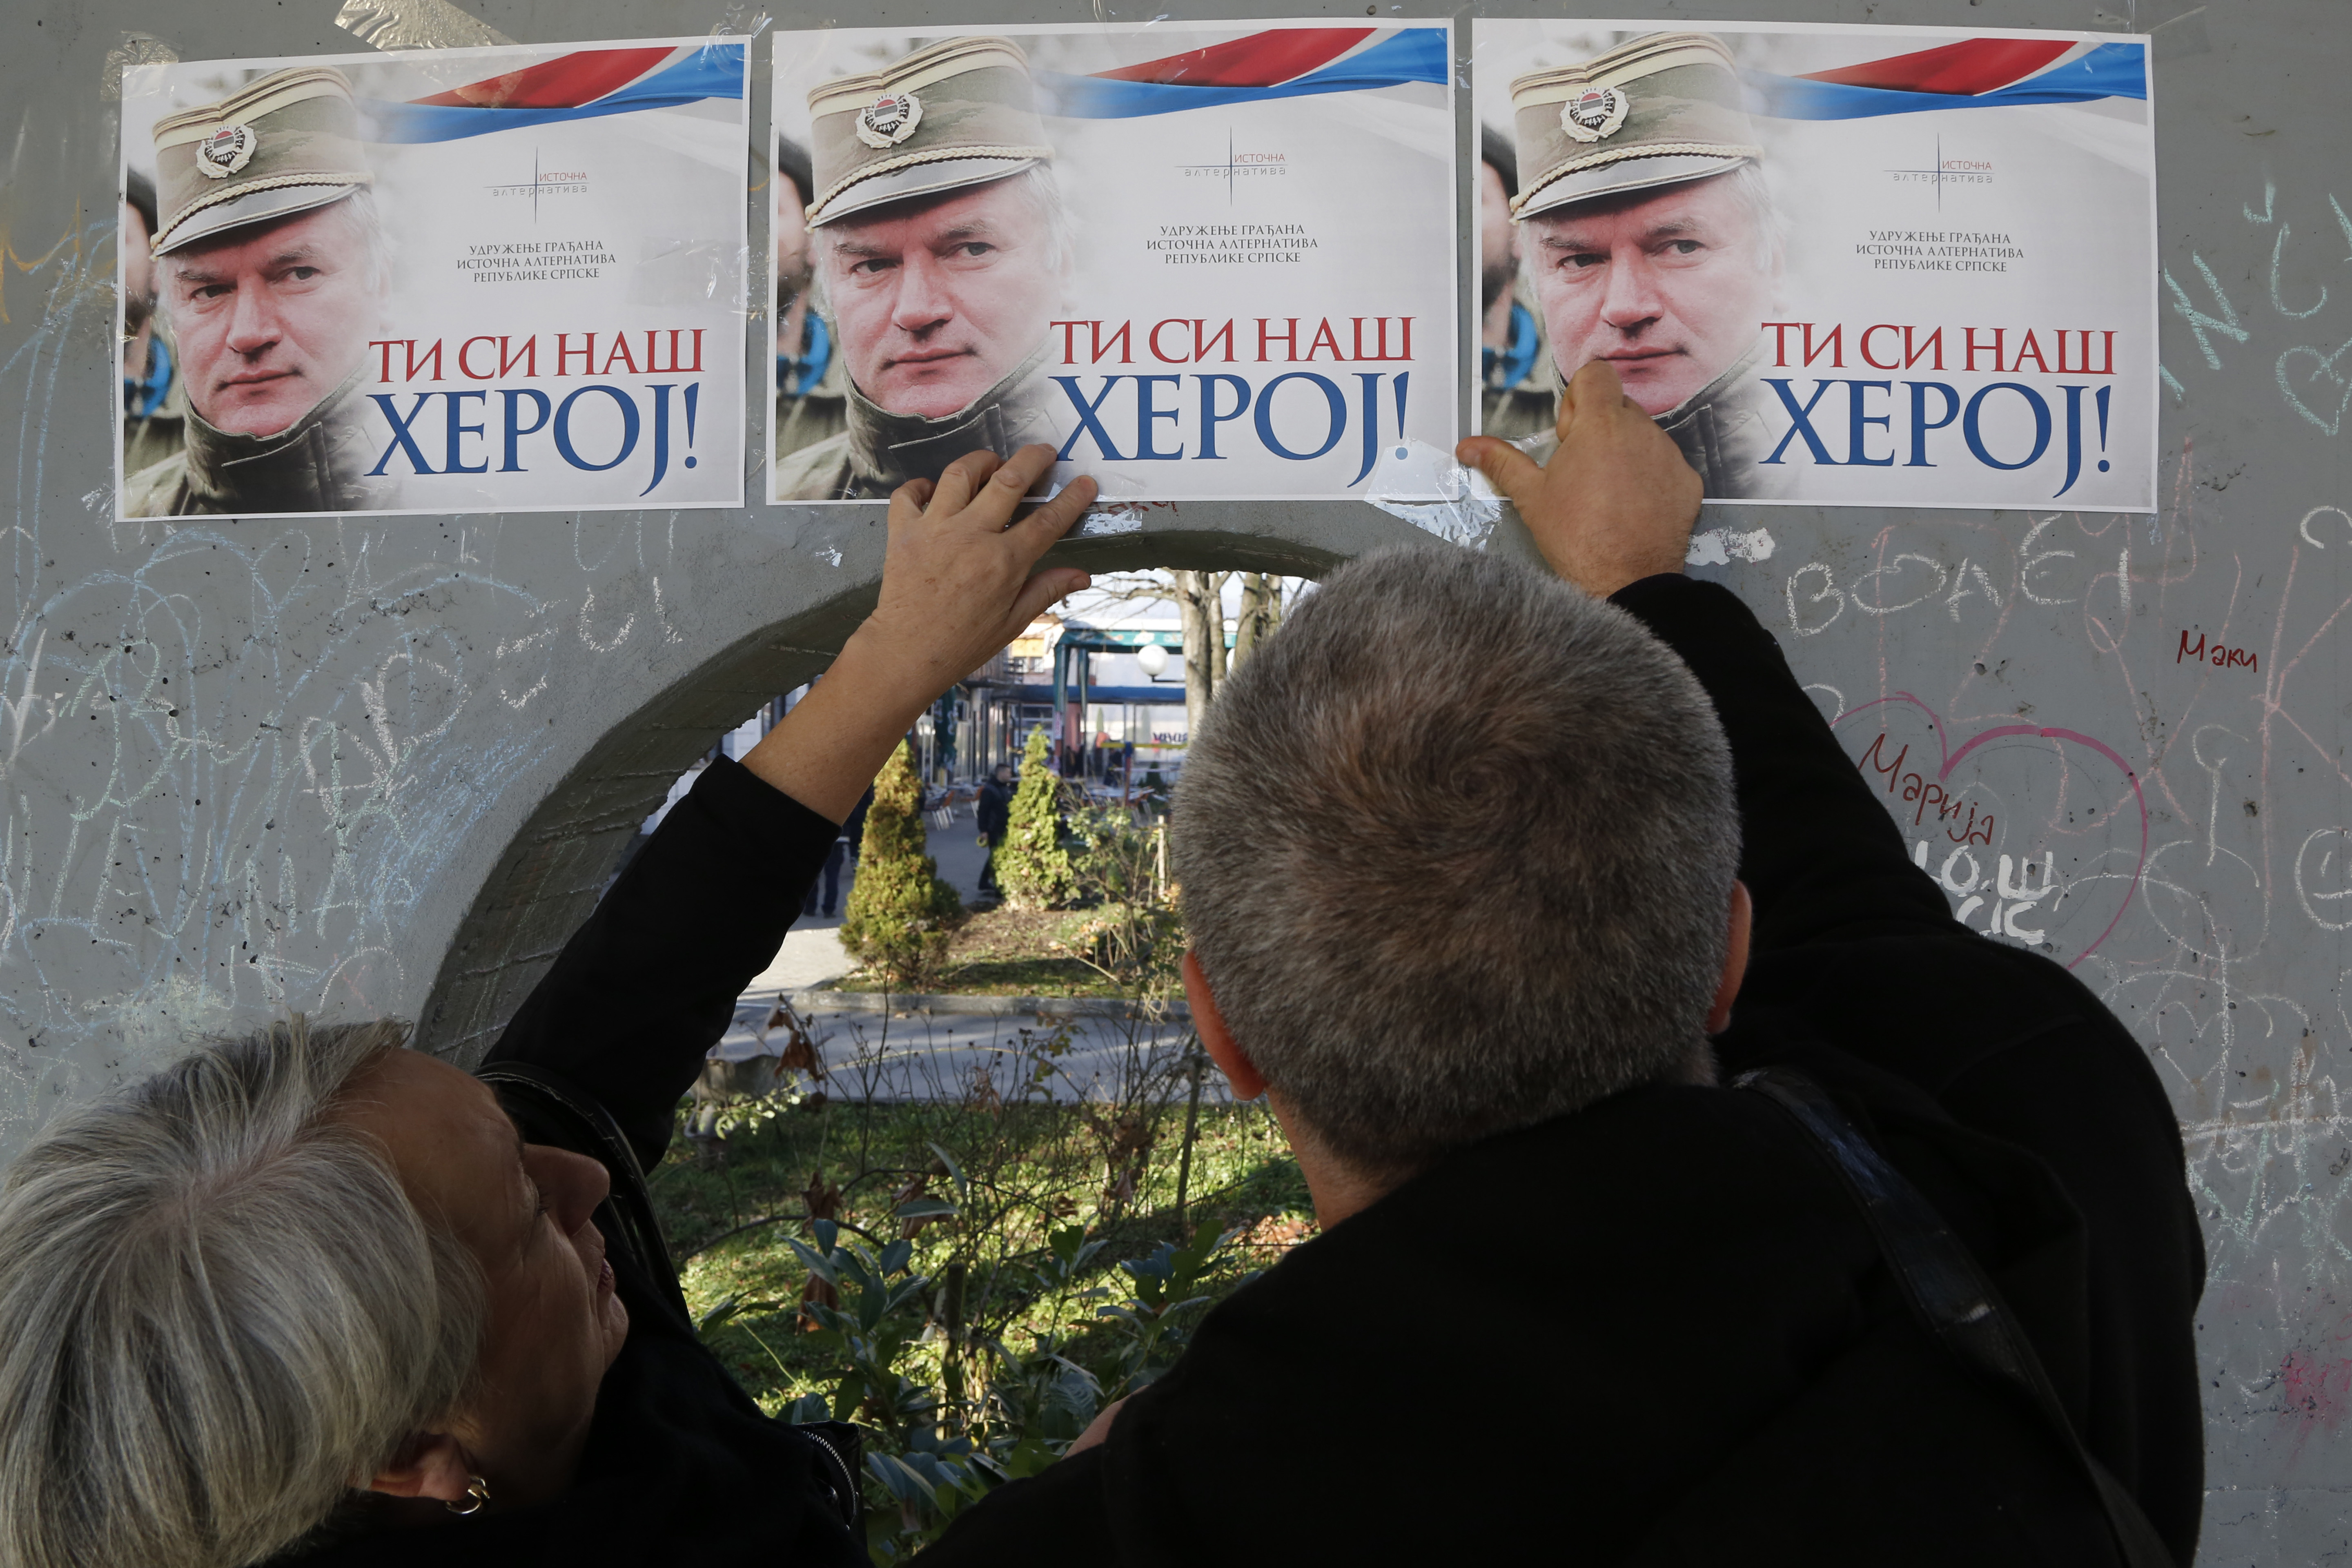 People attach posters of former Bosnian Serb military chief Ratko Mladic on a wall in Bratunac, Bosnia, Wednesday, Nov. 22, 2017. The Yugoslav War Crimes Tribunal in the The Hague is scheduled to hand down the verdict in the genocide case against former Bosnian Serb military chief Ratko Mladic on Wednesday. (AP Photo/Amel Emric)